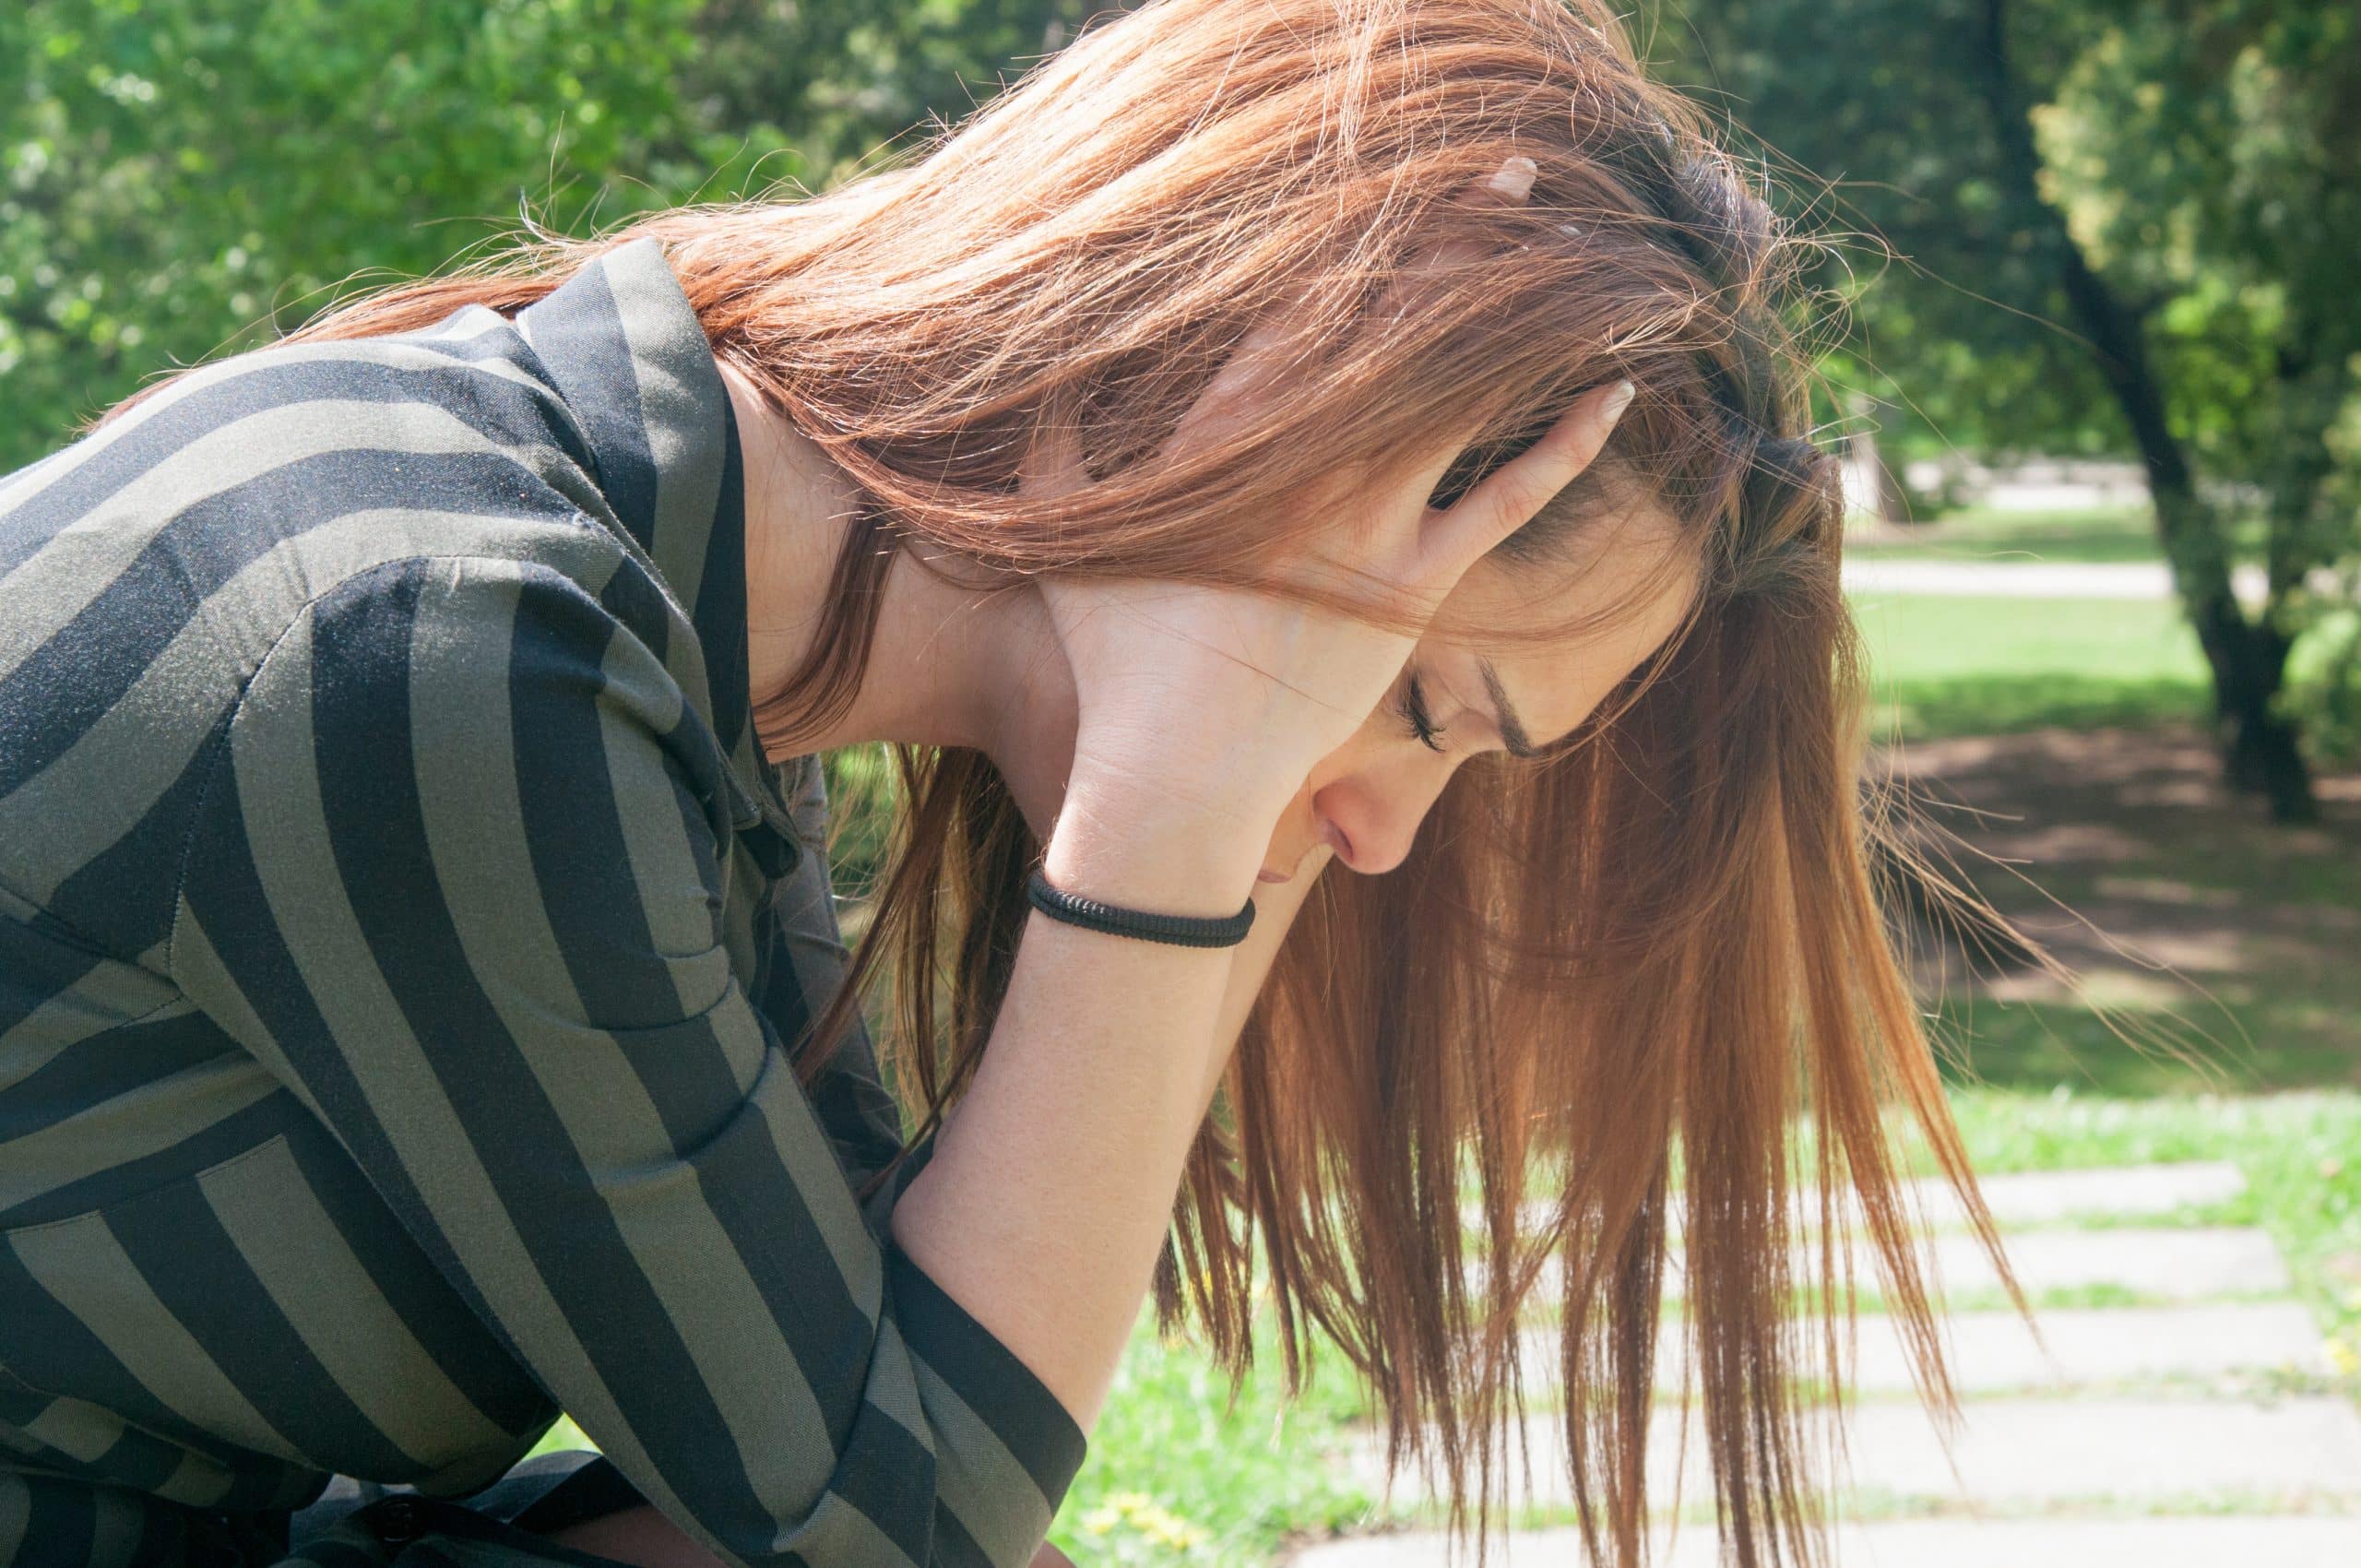 An anxious person holding their head between their hands on a garden due to a psychological disorder.